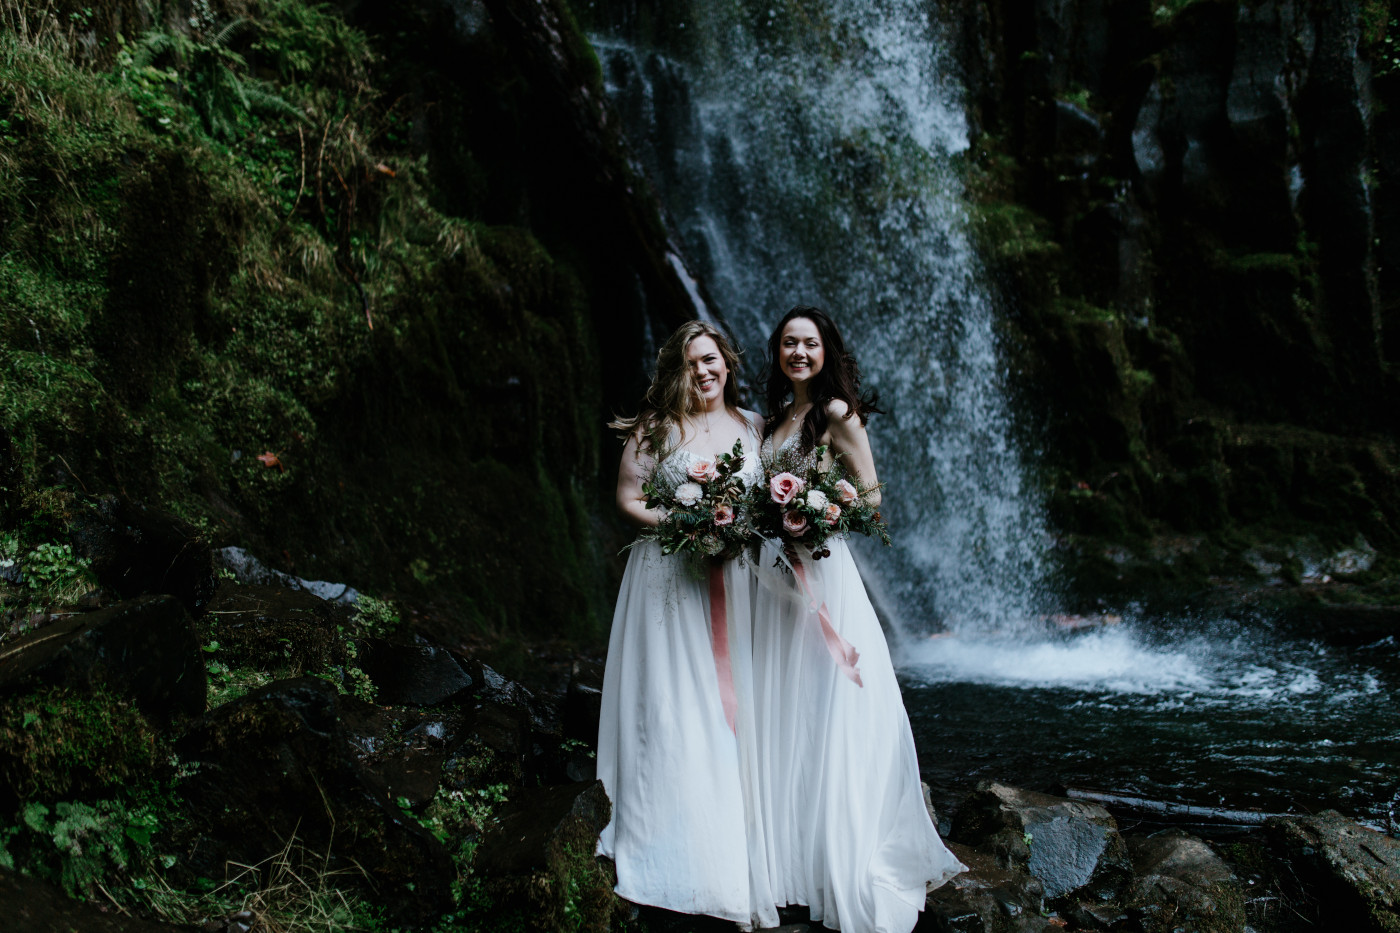 Hayley and Tiffany stand side by side in front of the waterfall. Elopement photography at the Columbia River Gorge by Sienna Plus Josh.